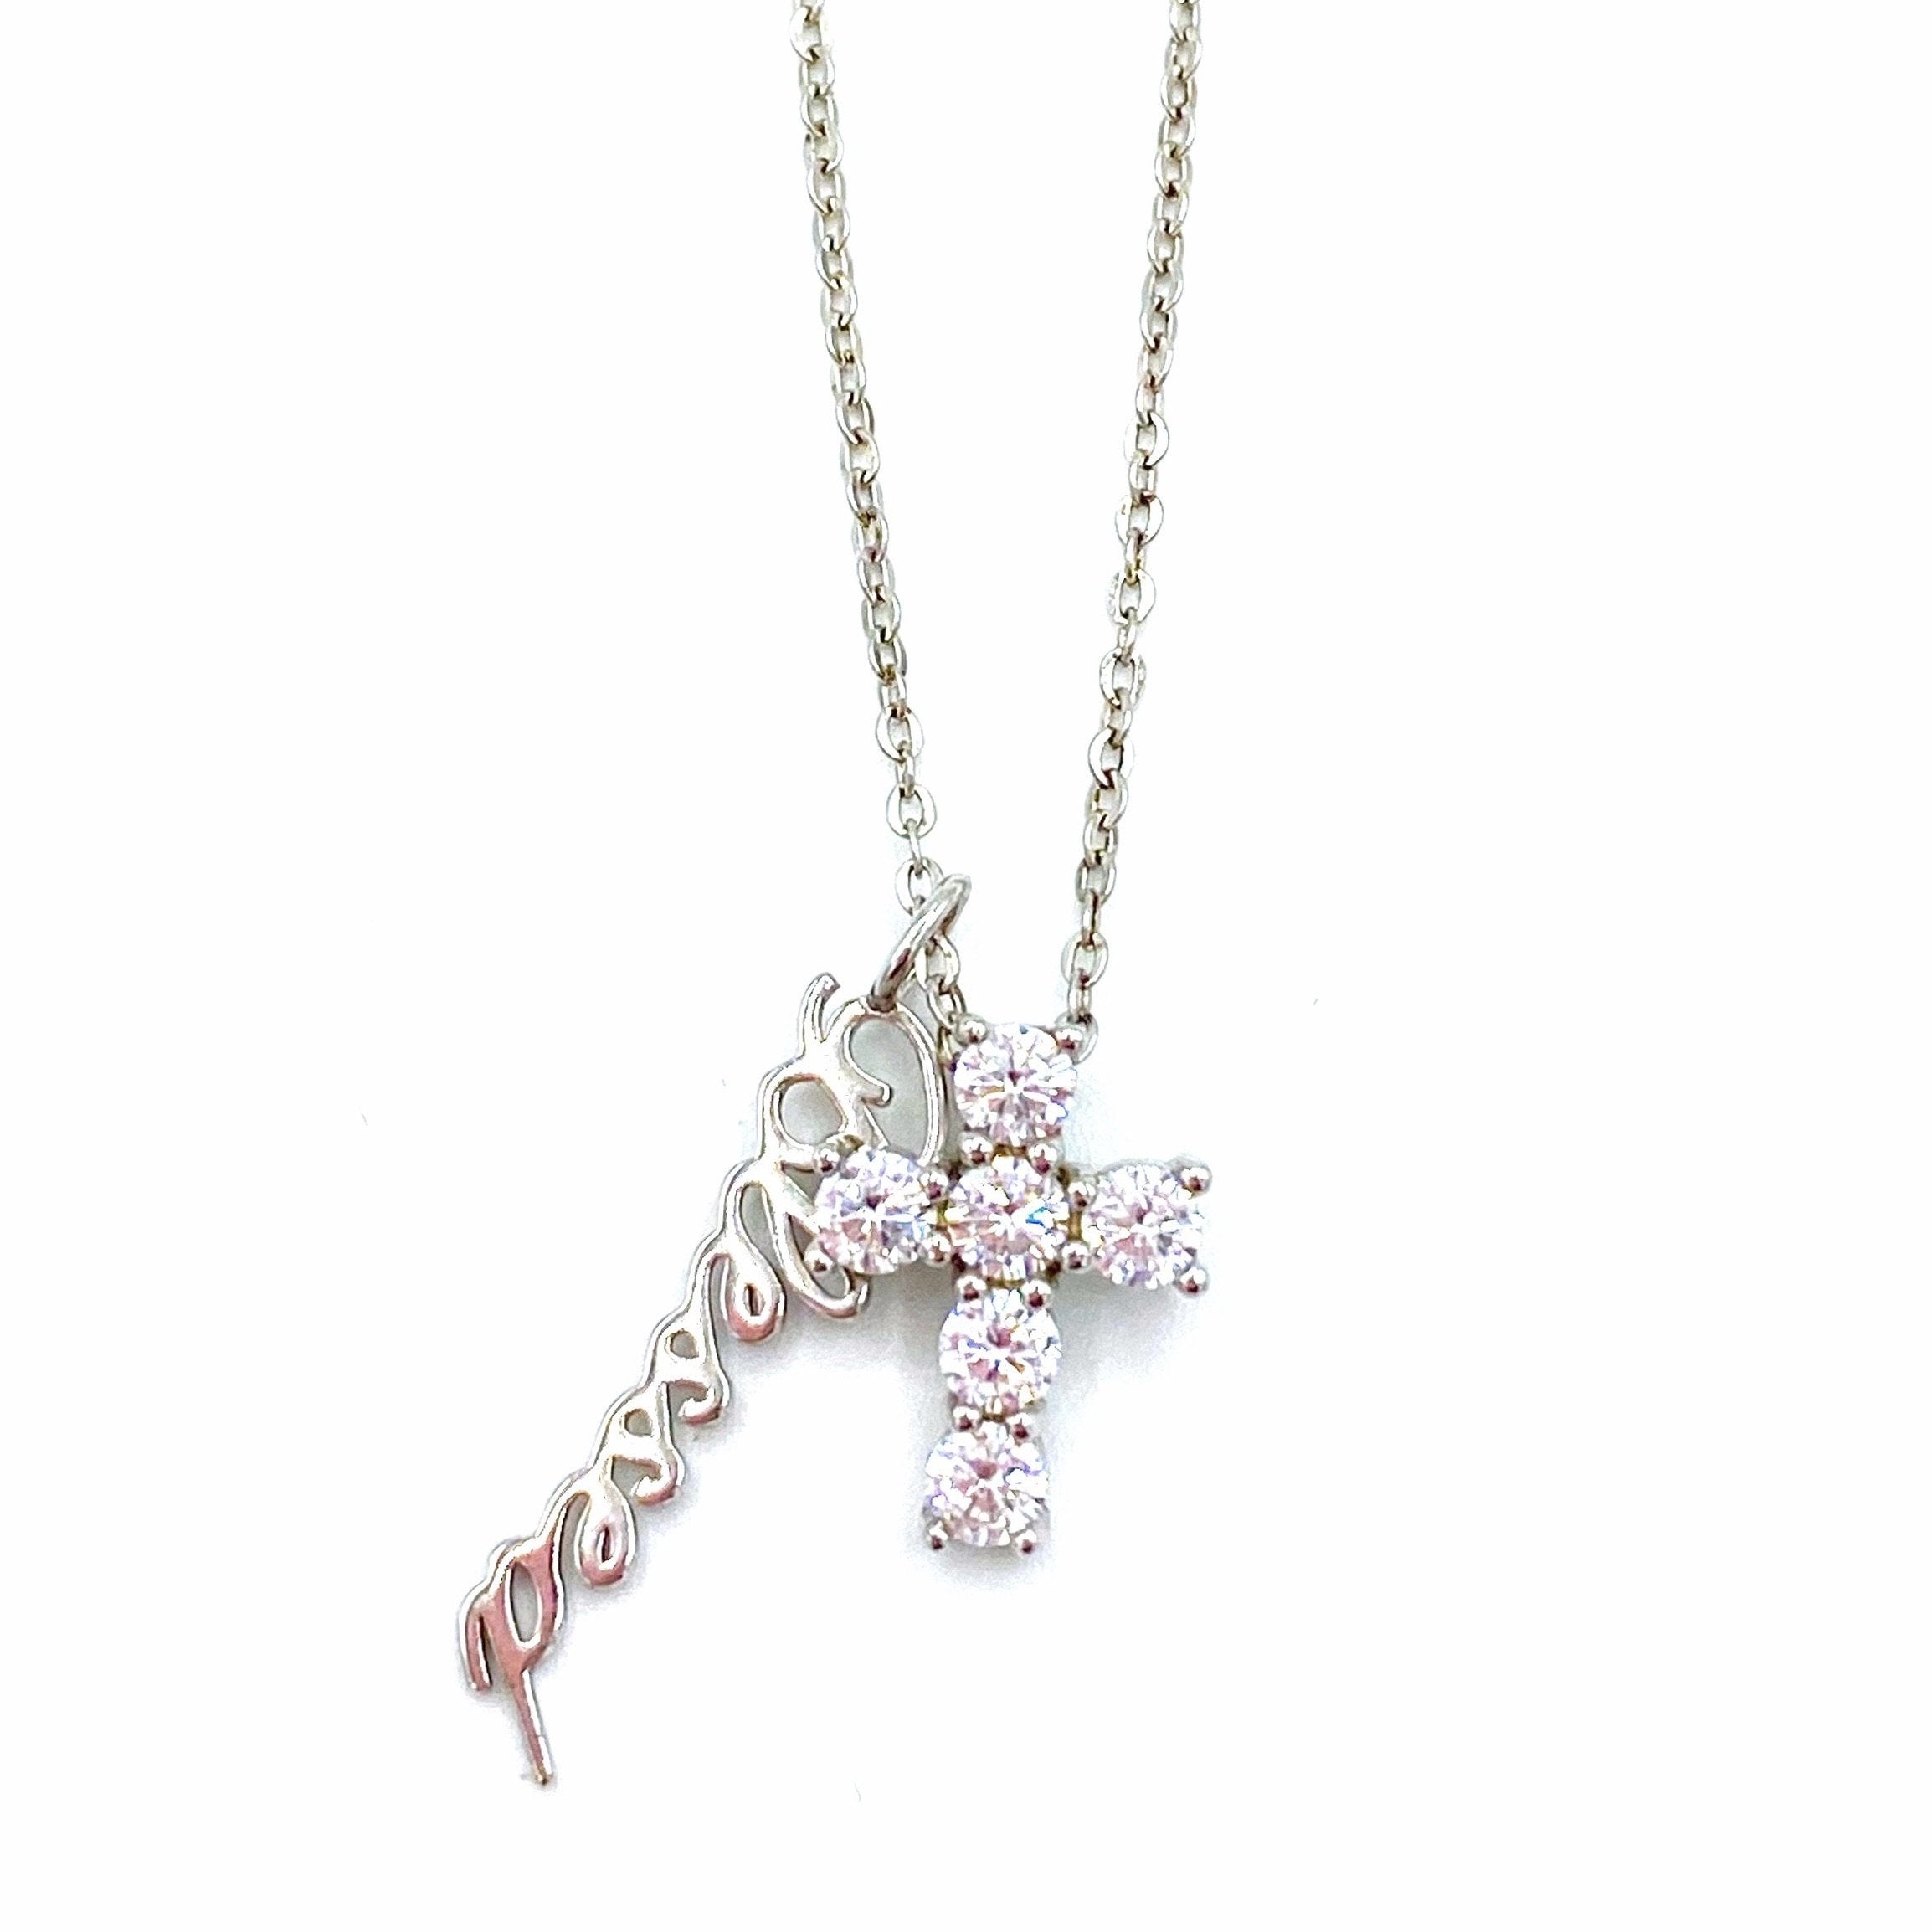 BLESSED CROSS necklace